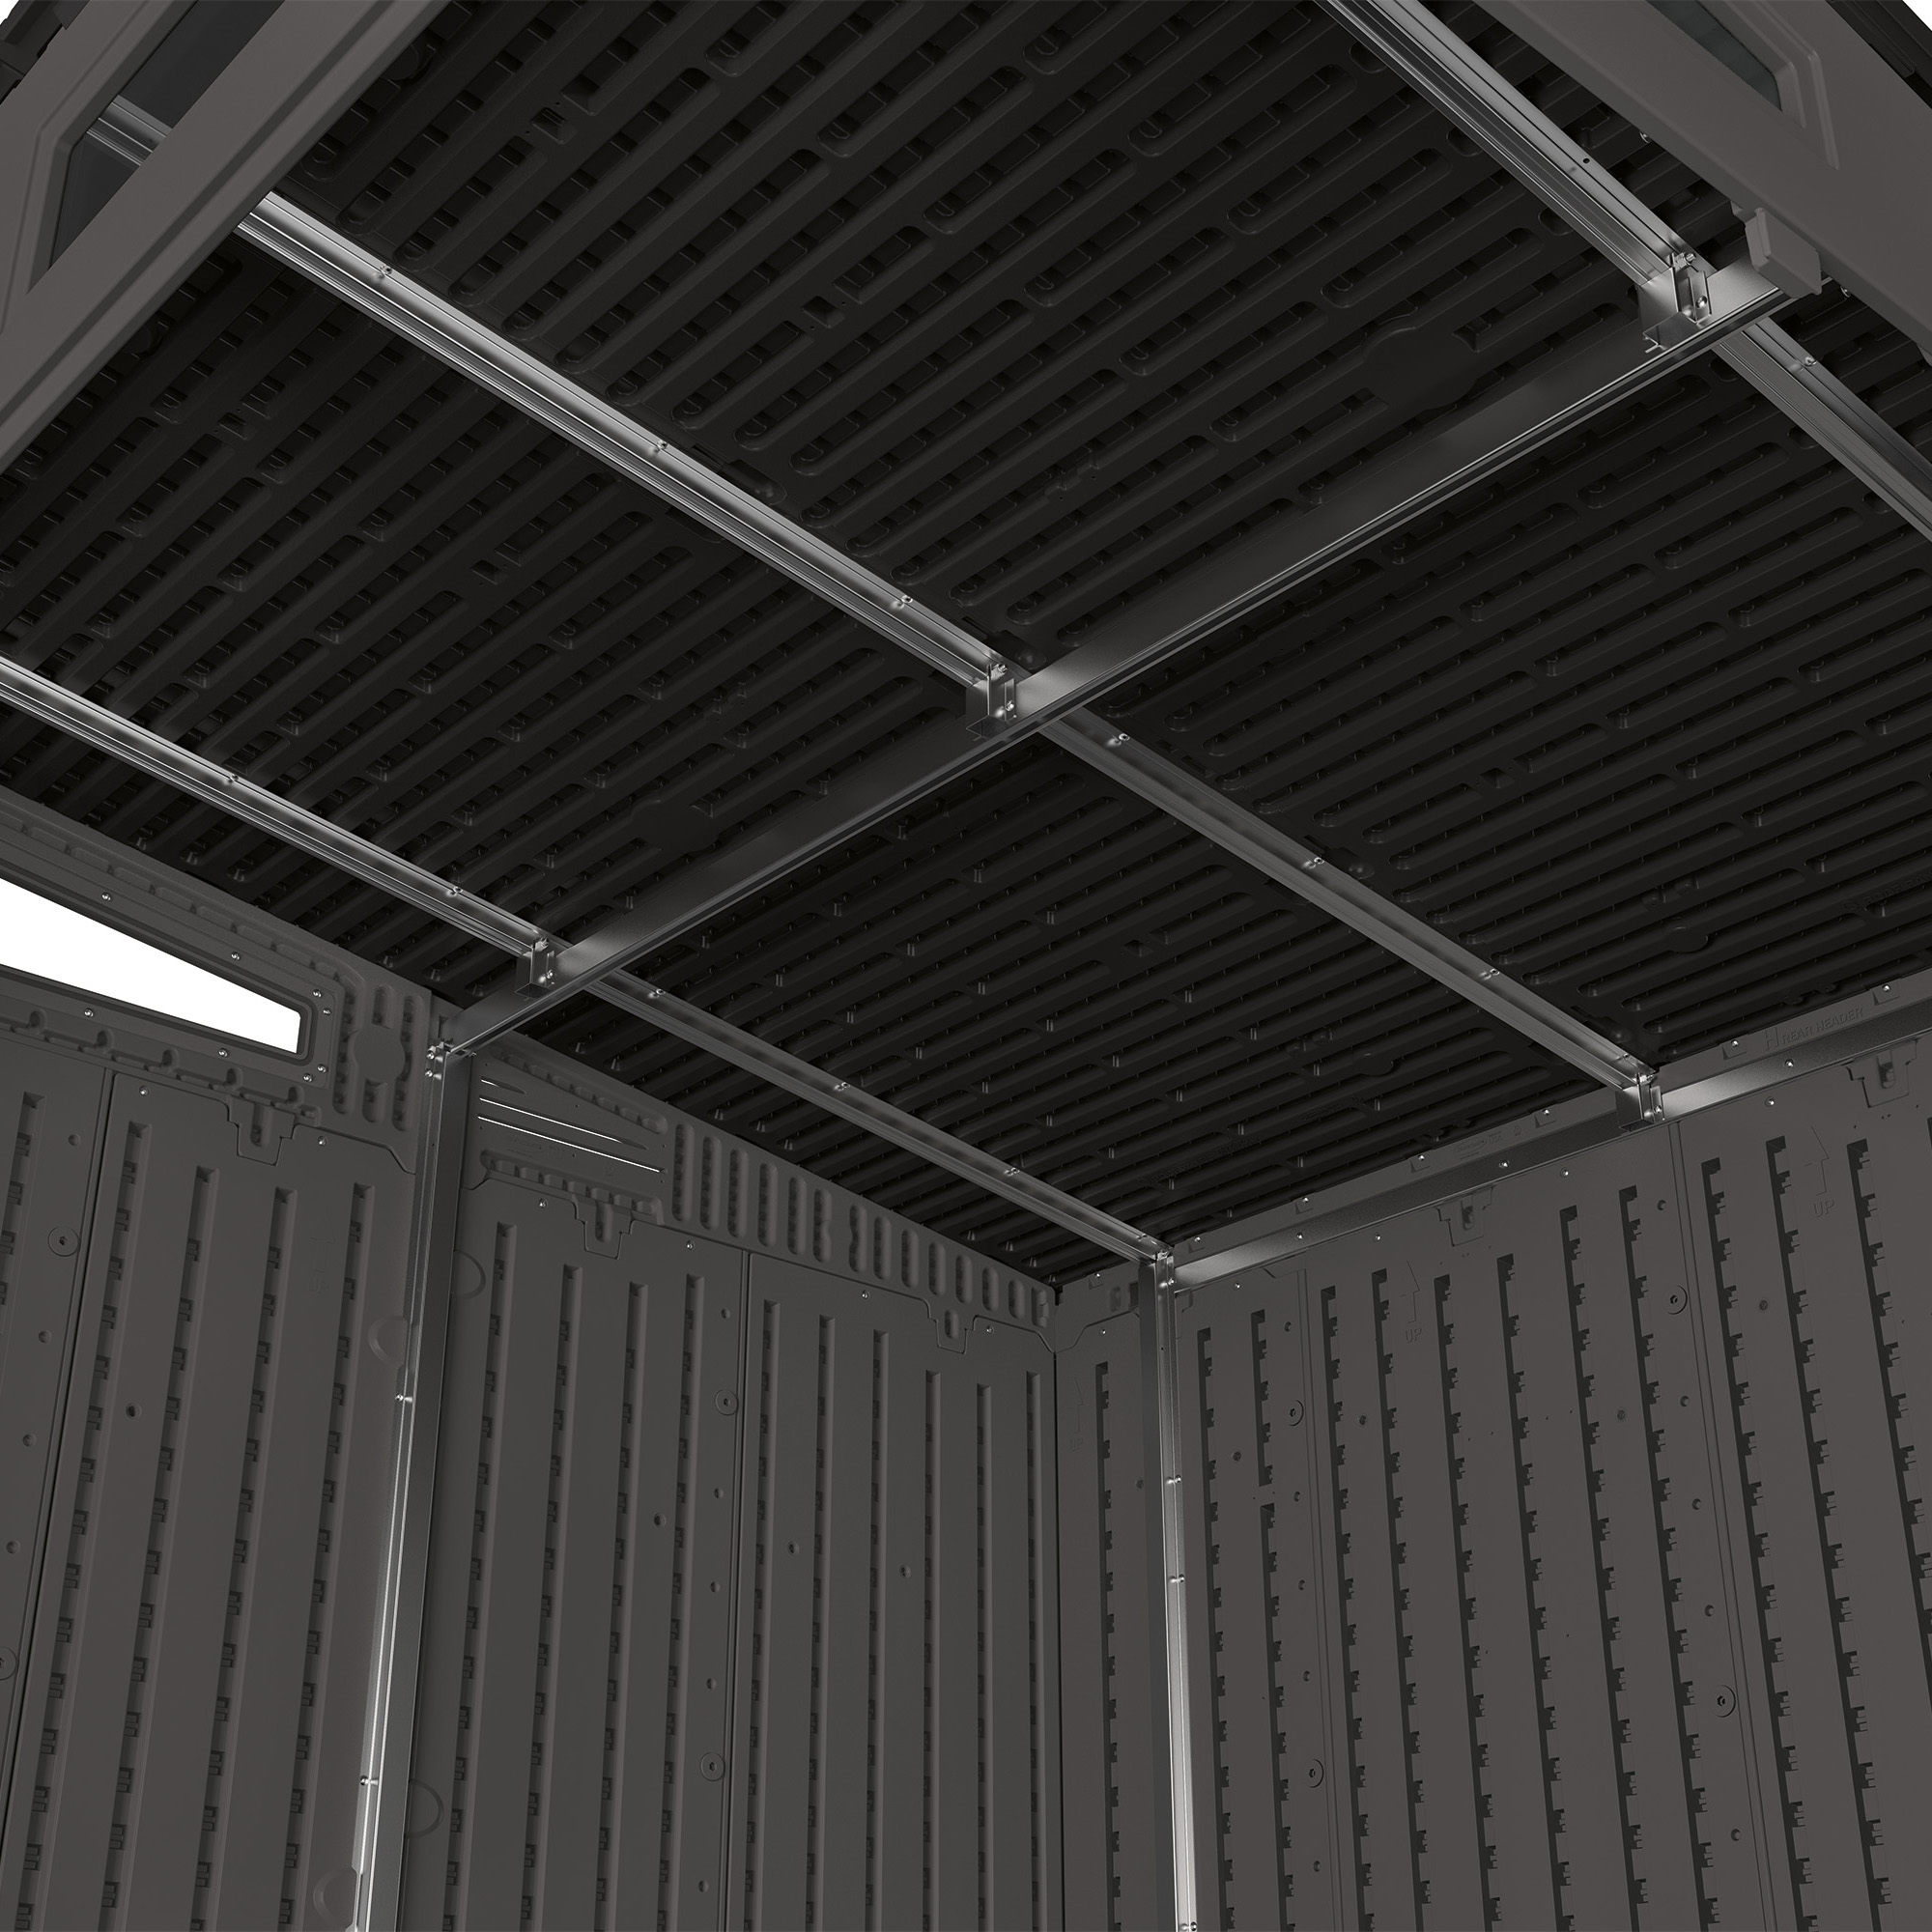 Suncast Resin Modernist Outdoor Storage Shed, Black and Gray, 86.5 in D x 89.5 in H x 87.5 in W - image 3 of 5